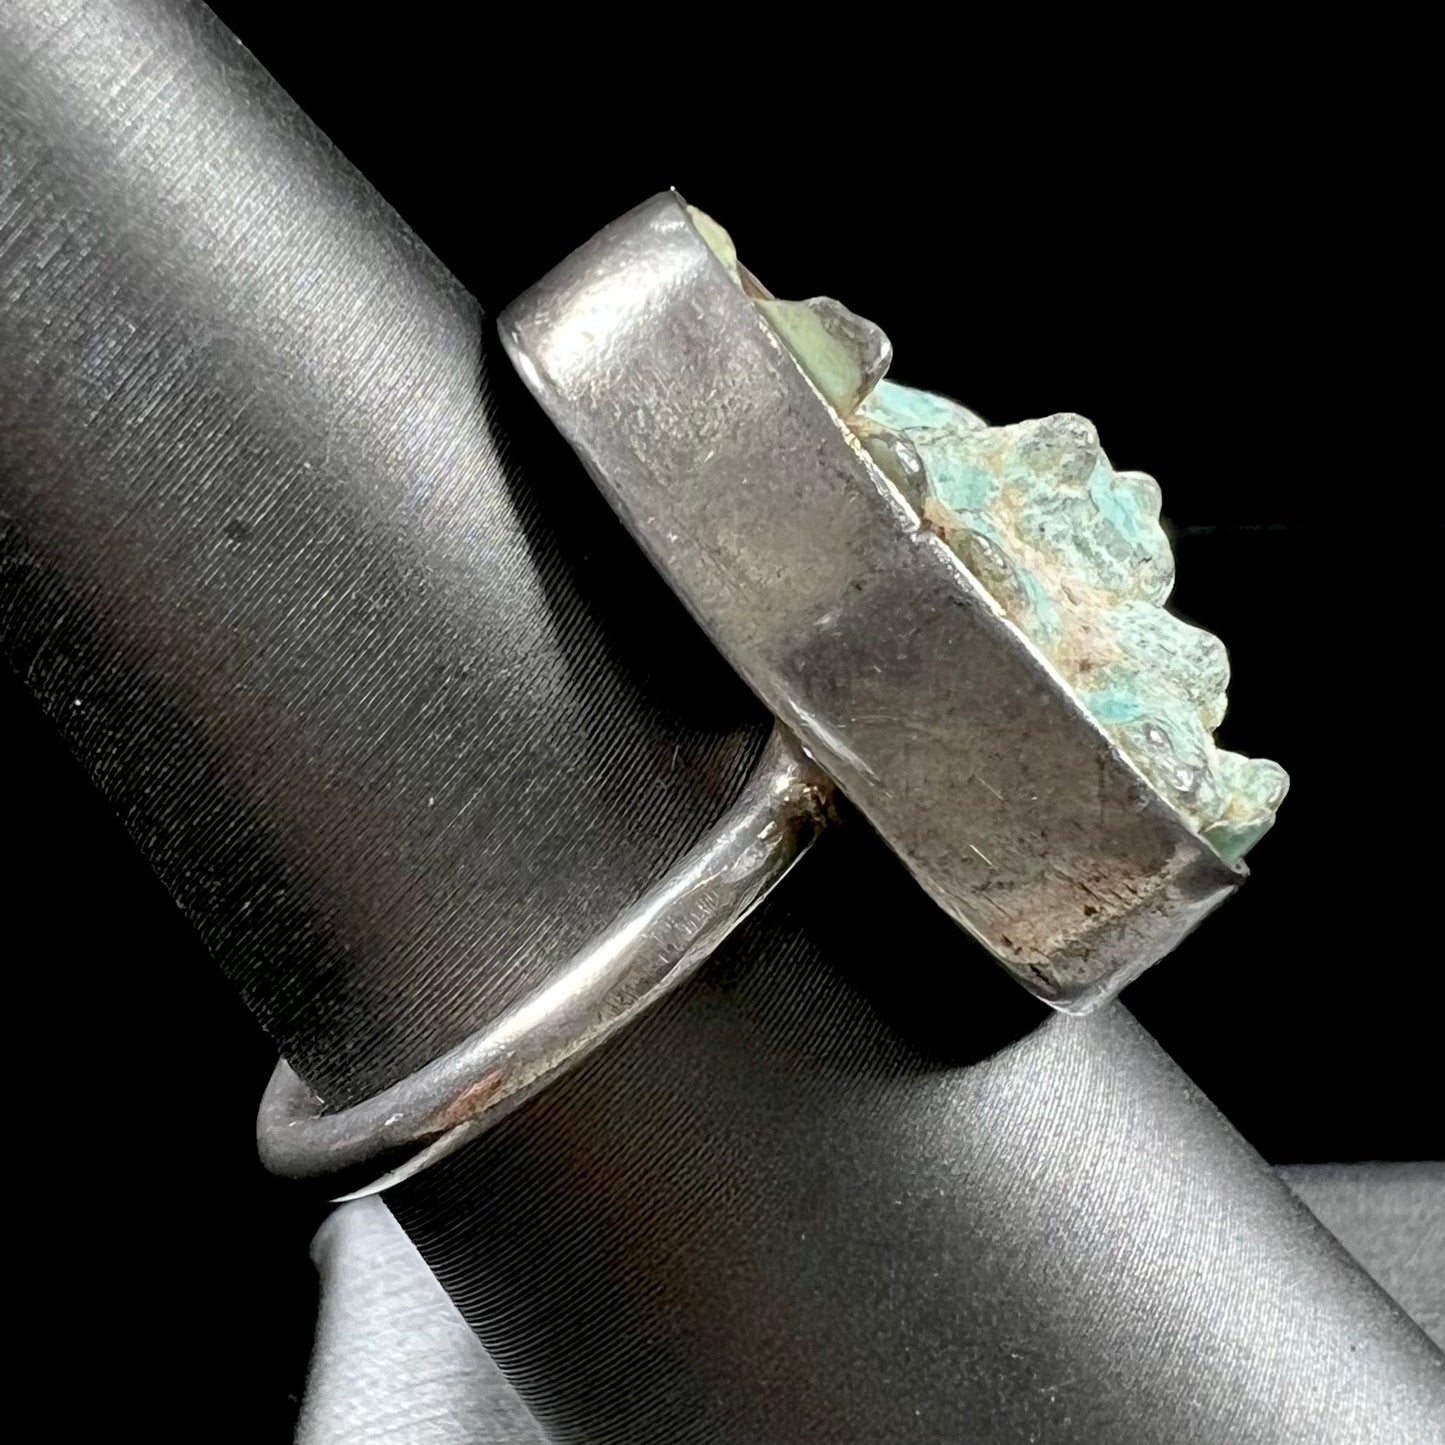 A handmade unisex sterling silver solitaire ring set with a rough, unpolished piece of turquoise stone.